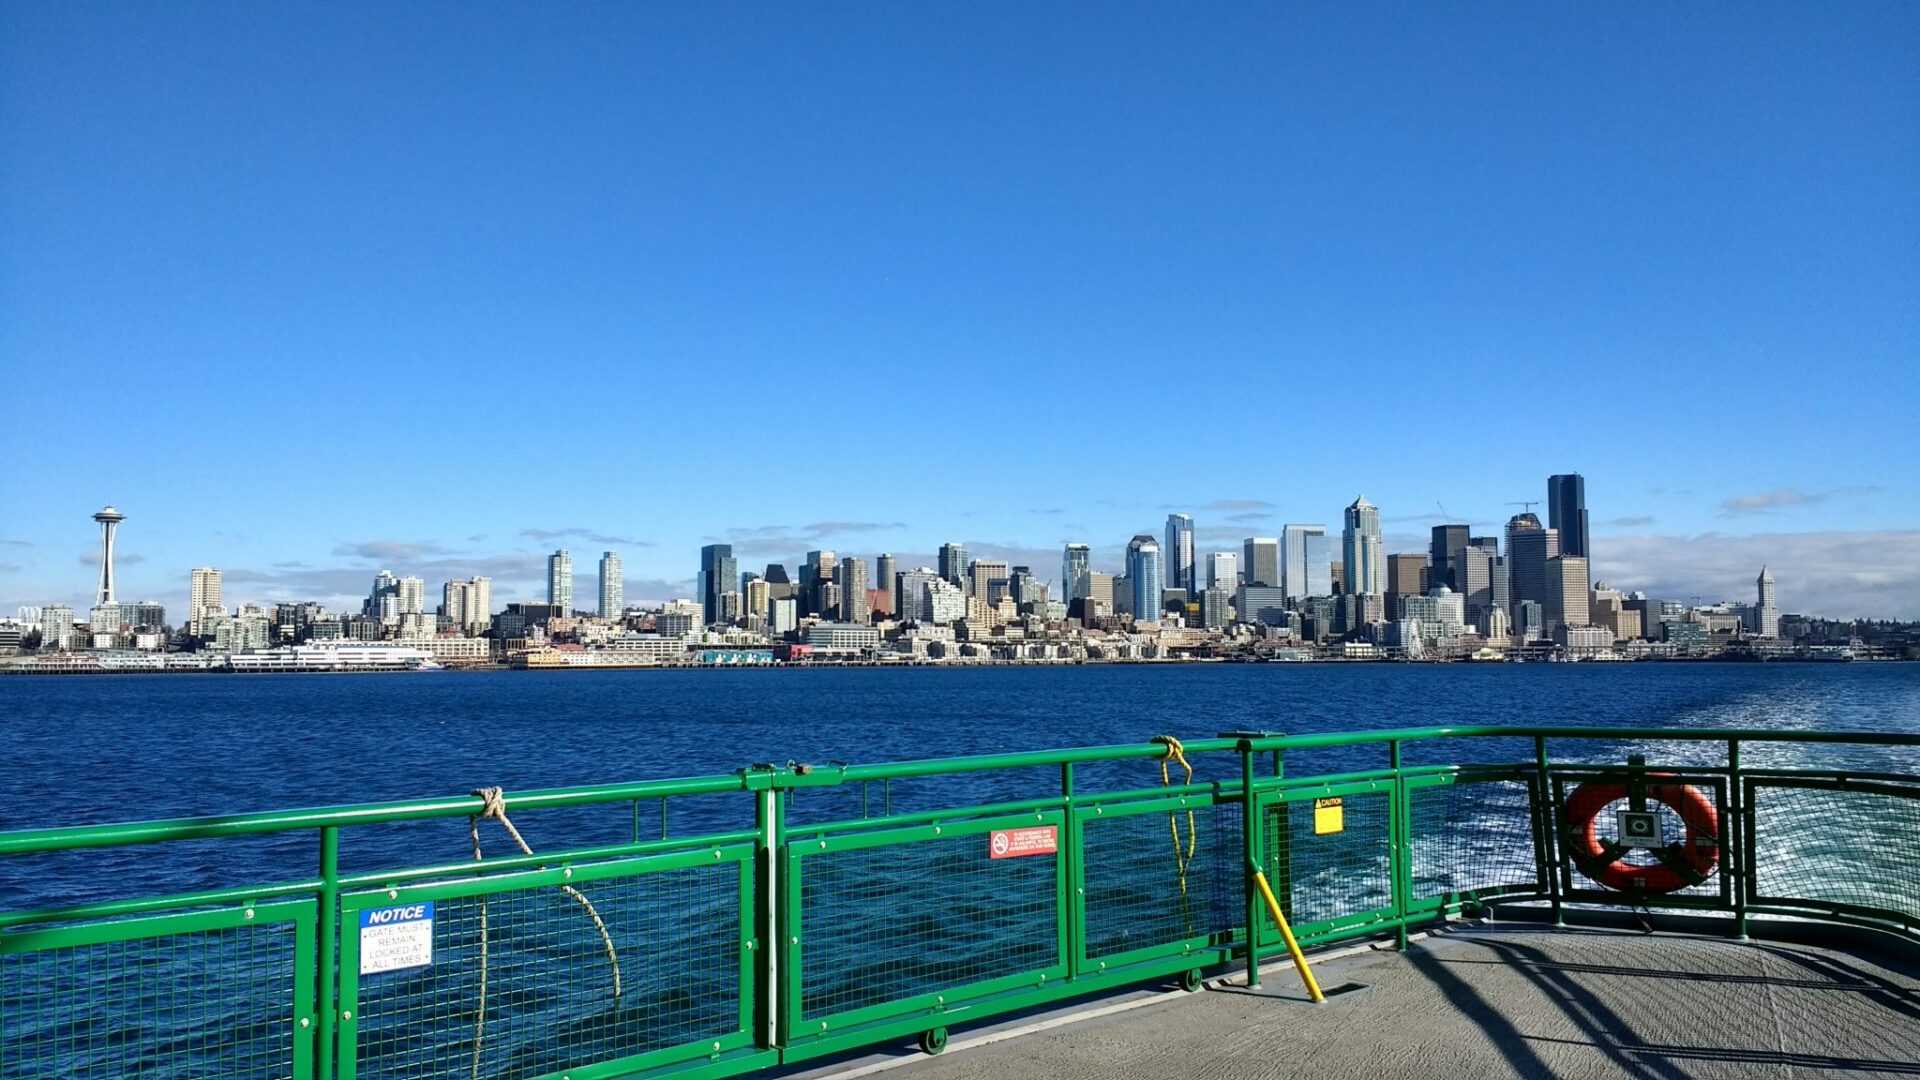 The Seattle city skyline from the ferry on the way to Bainbridge Island. The deck of the ferry is in the foreground